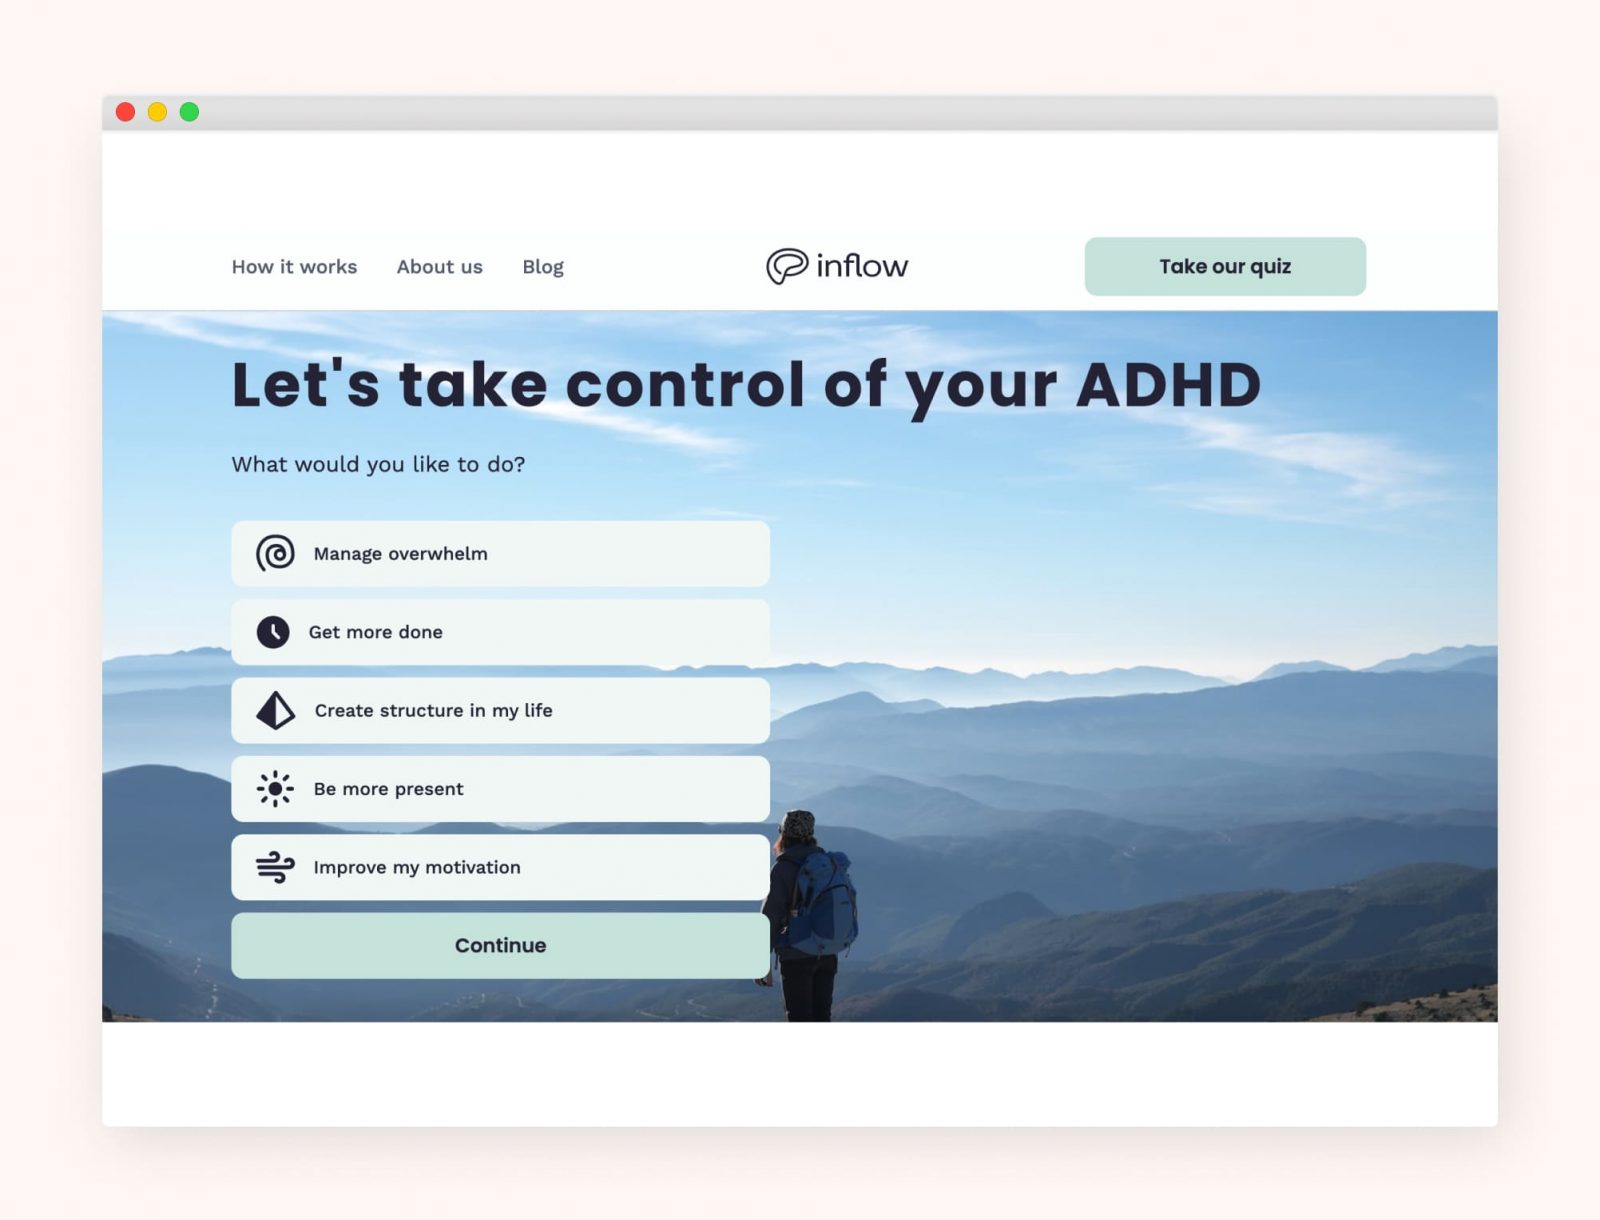 Tamara’s web app for people with ADHD